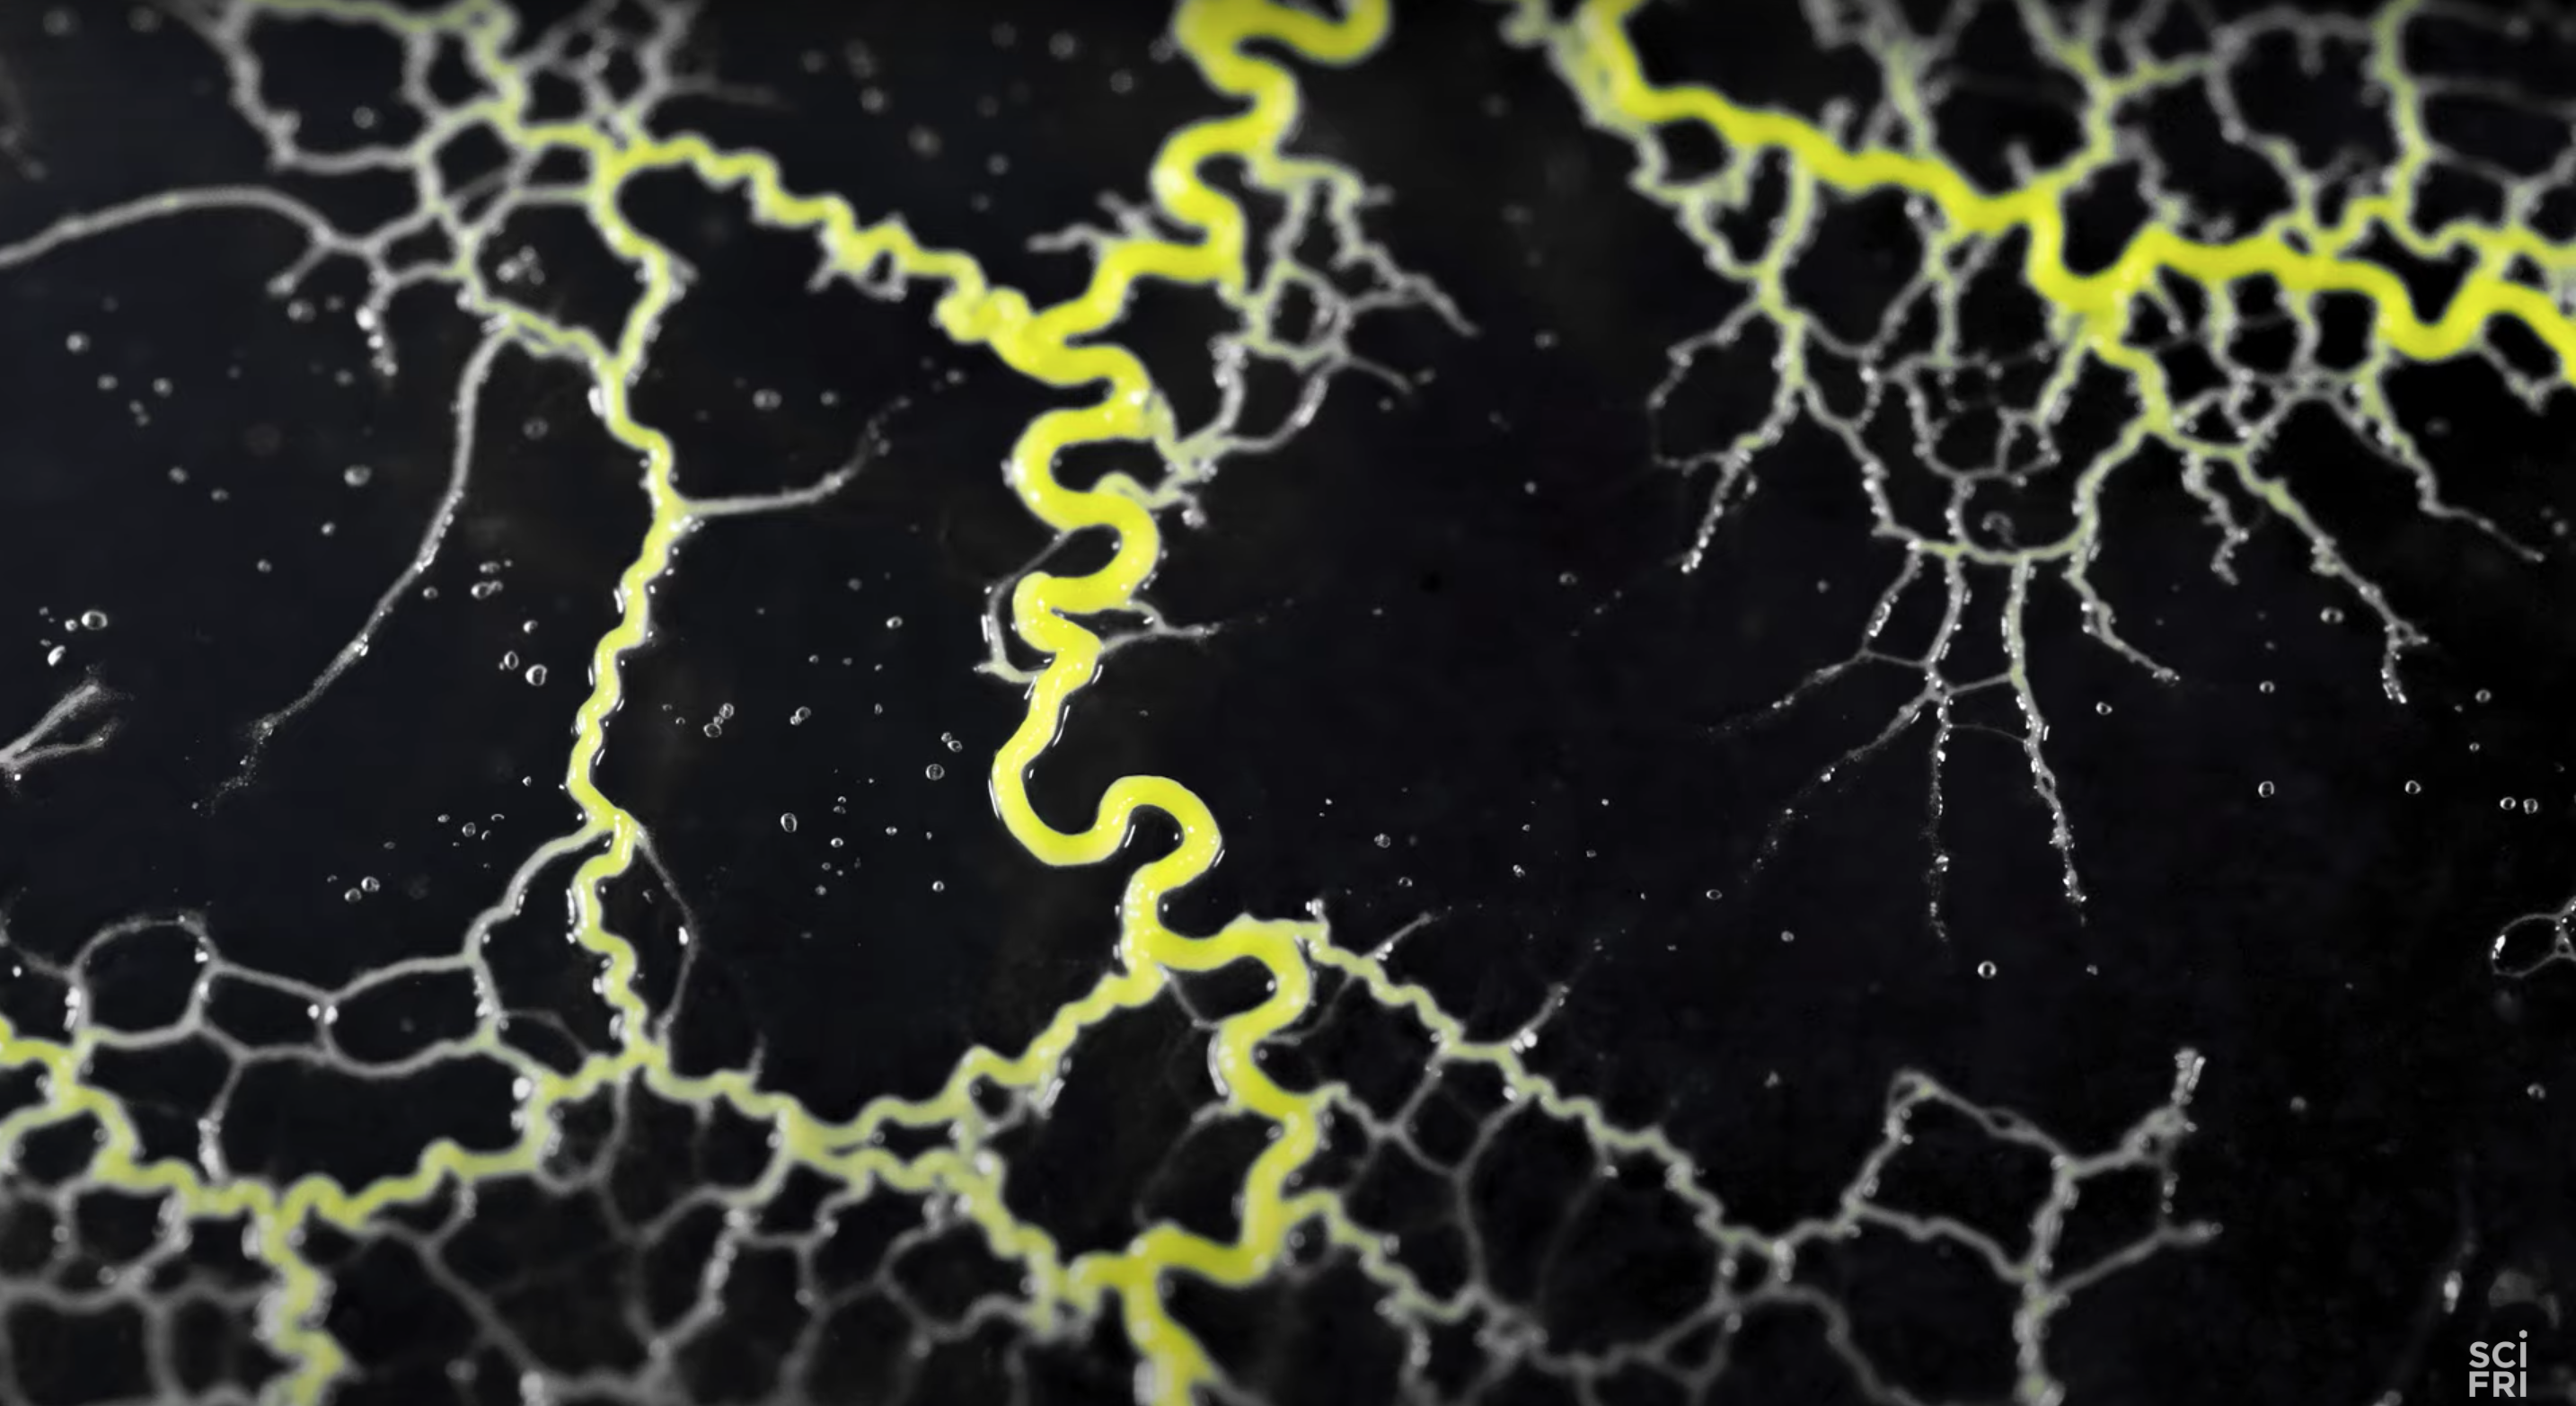 A close-up of a slime mold